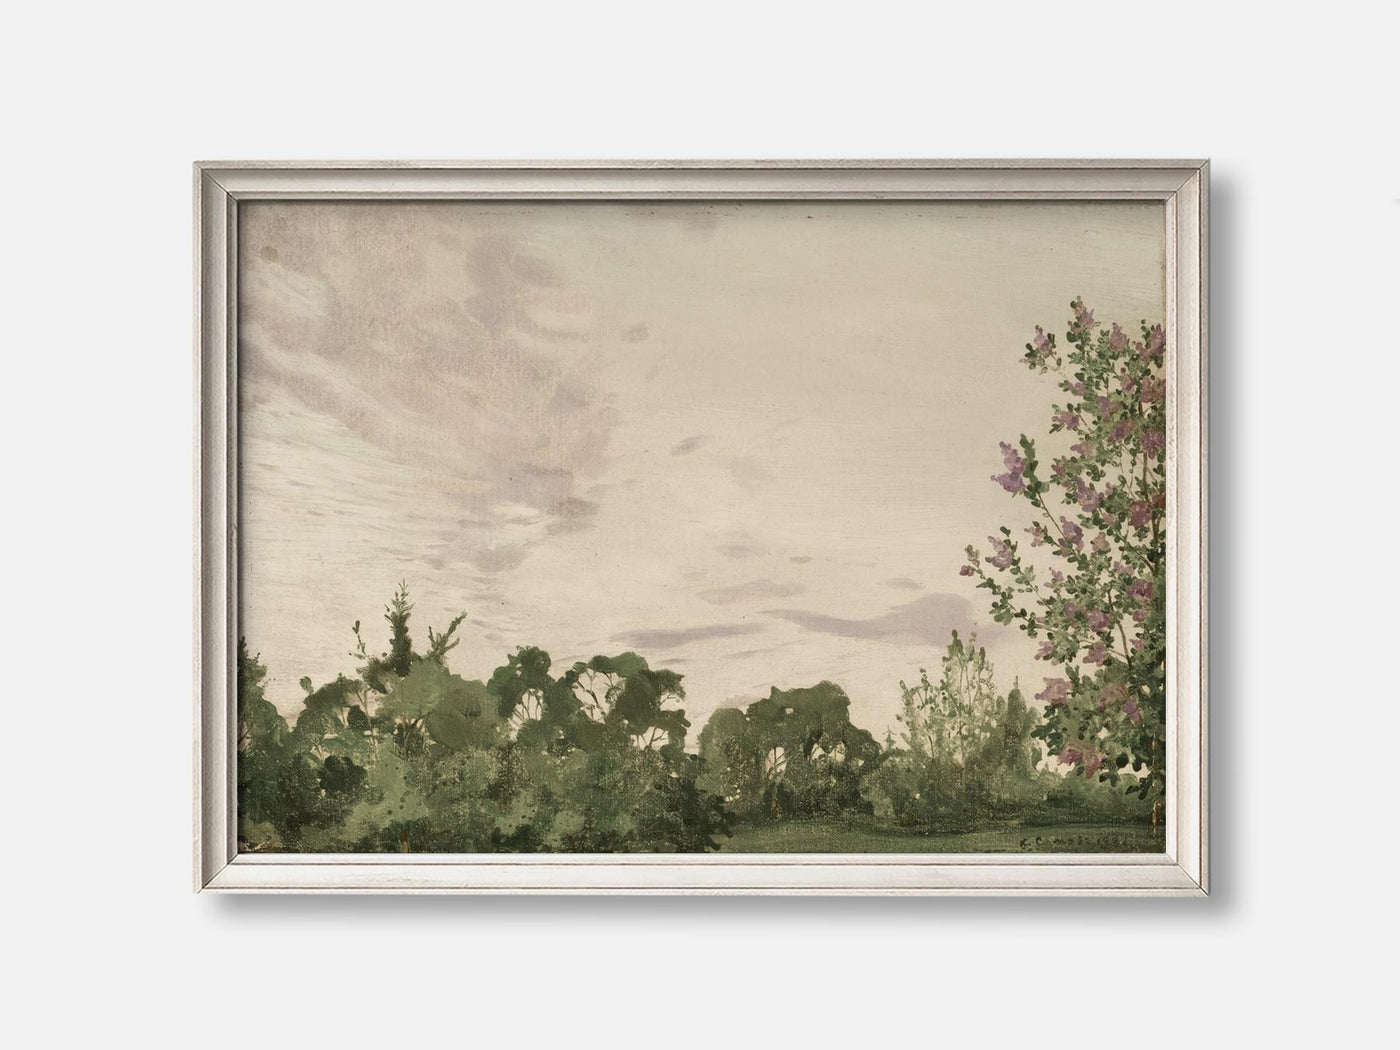 Evening Landscape with Lilacs mockup - A_spr43-V1-PC_F+O-SS_1-PS_5x7-C_def variant